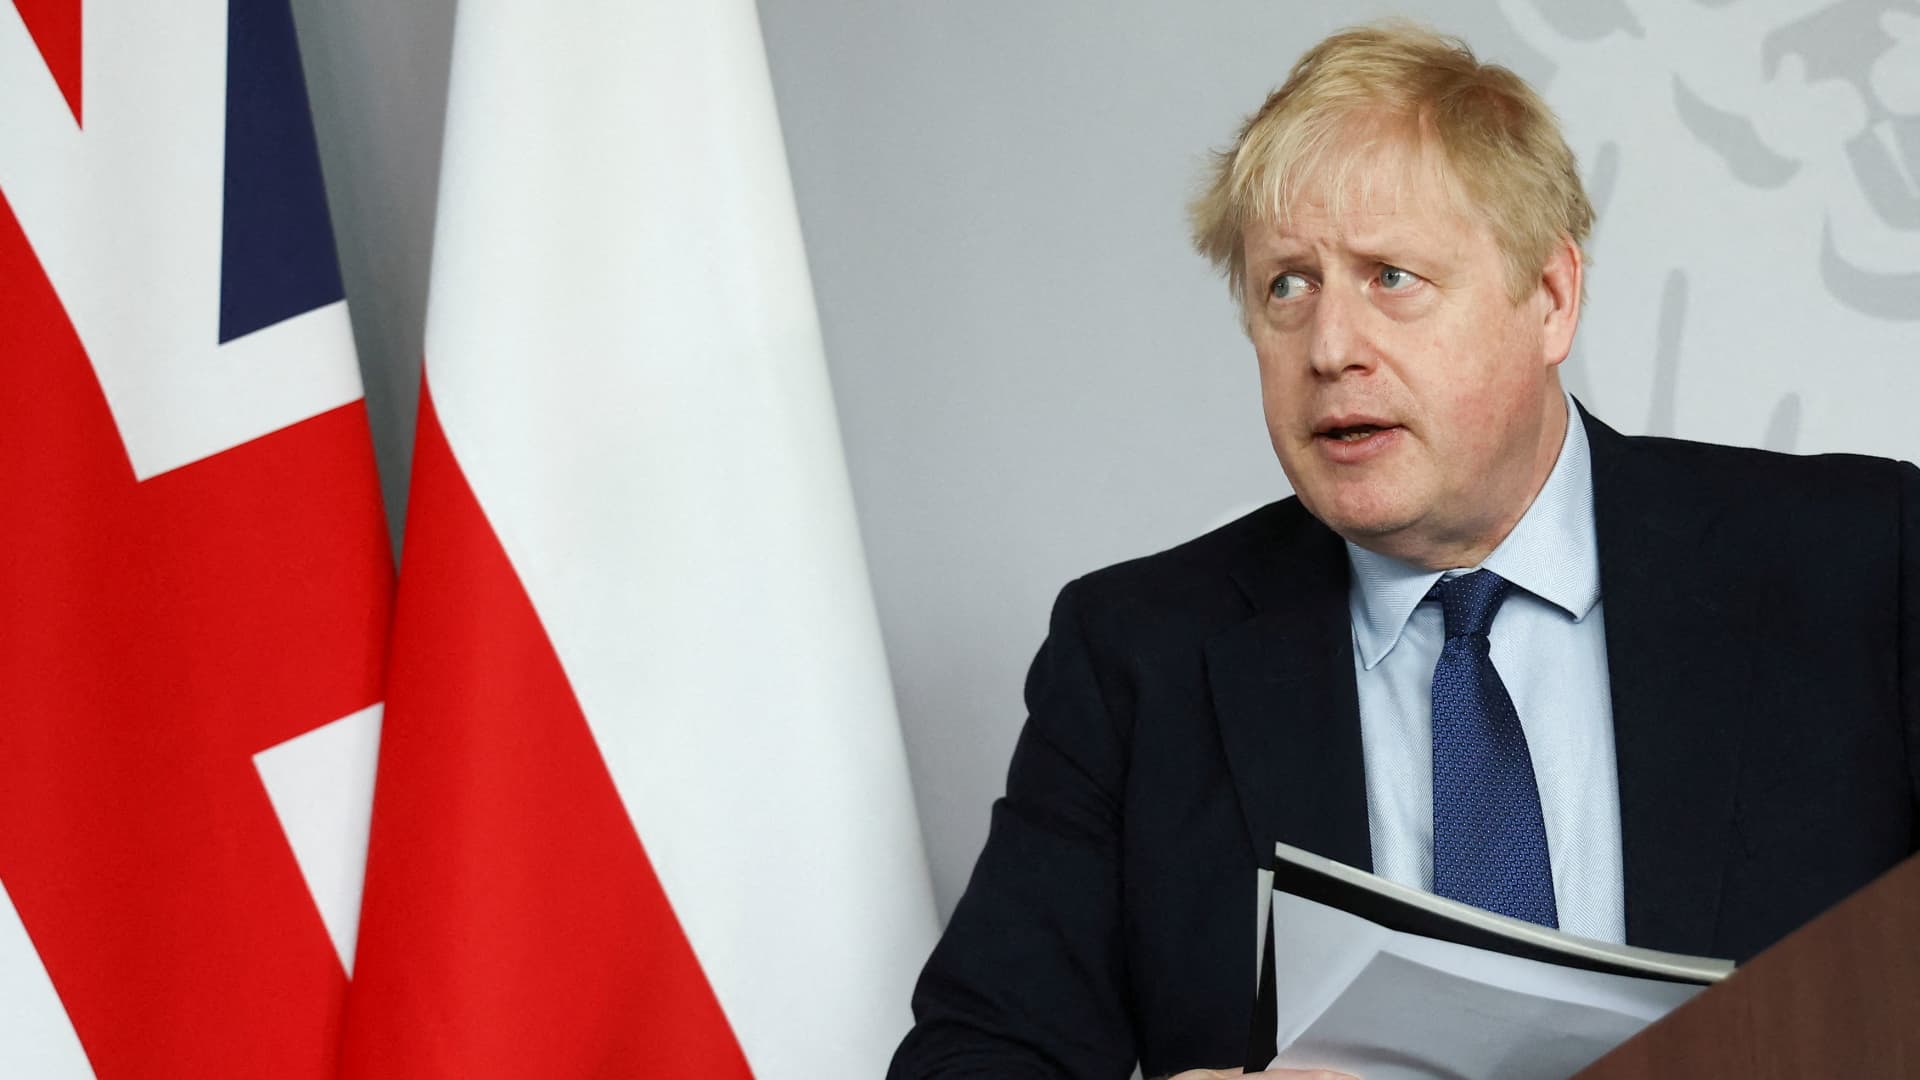 British Prime Minister Boris Johnson looks on during a news conference at British Embassy in Warsaw, Poland, March 1, 2022.